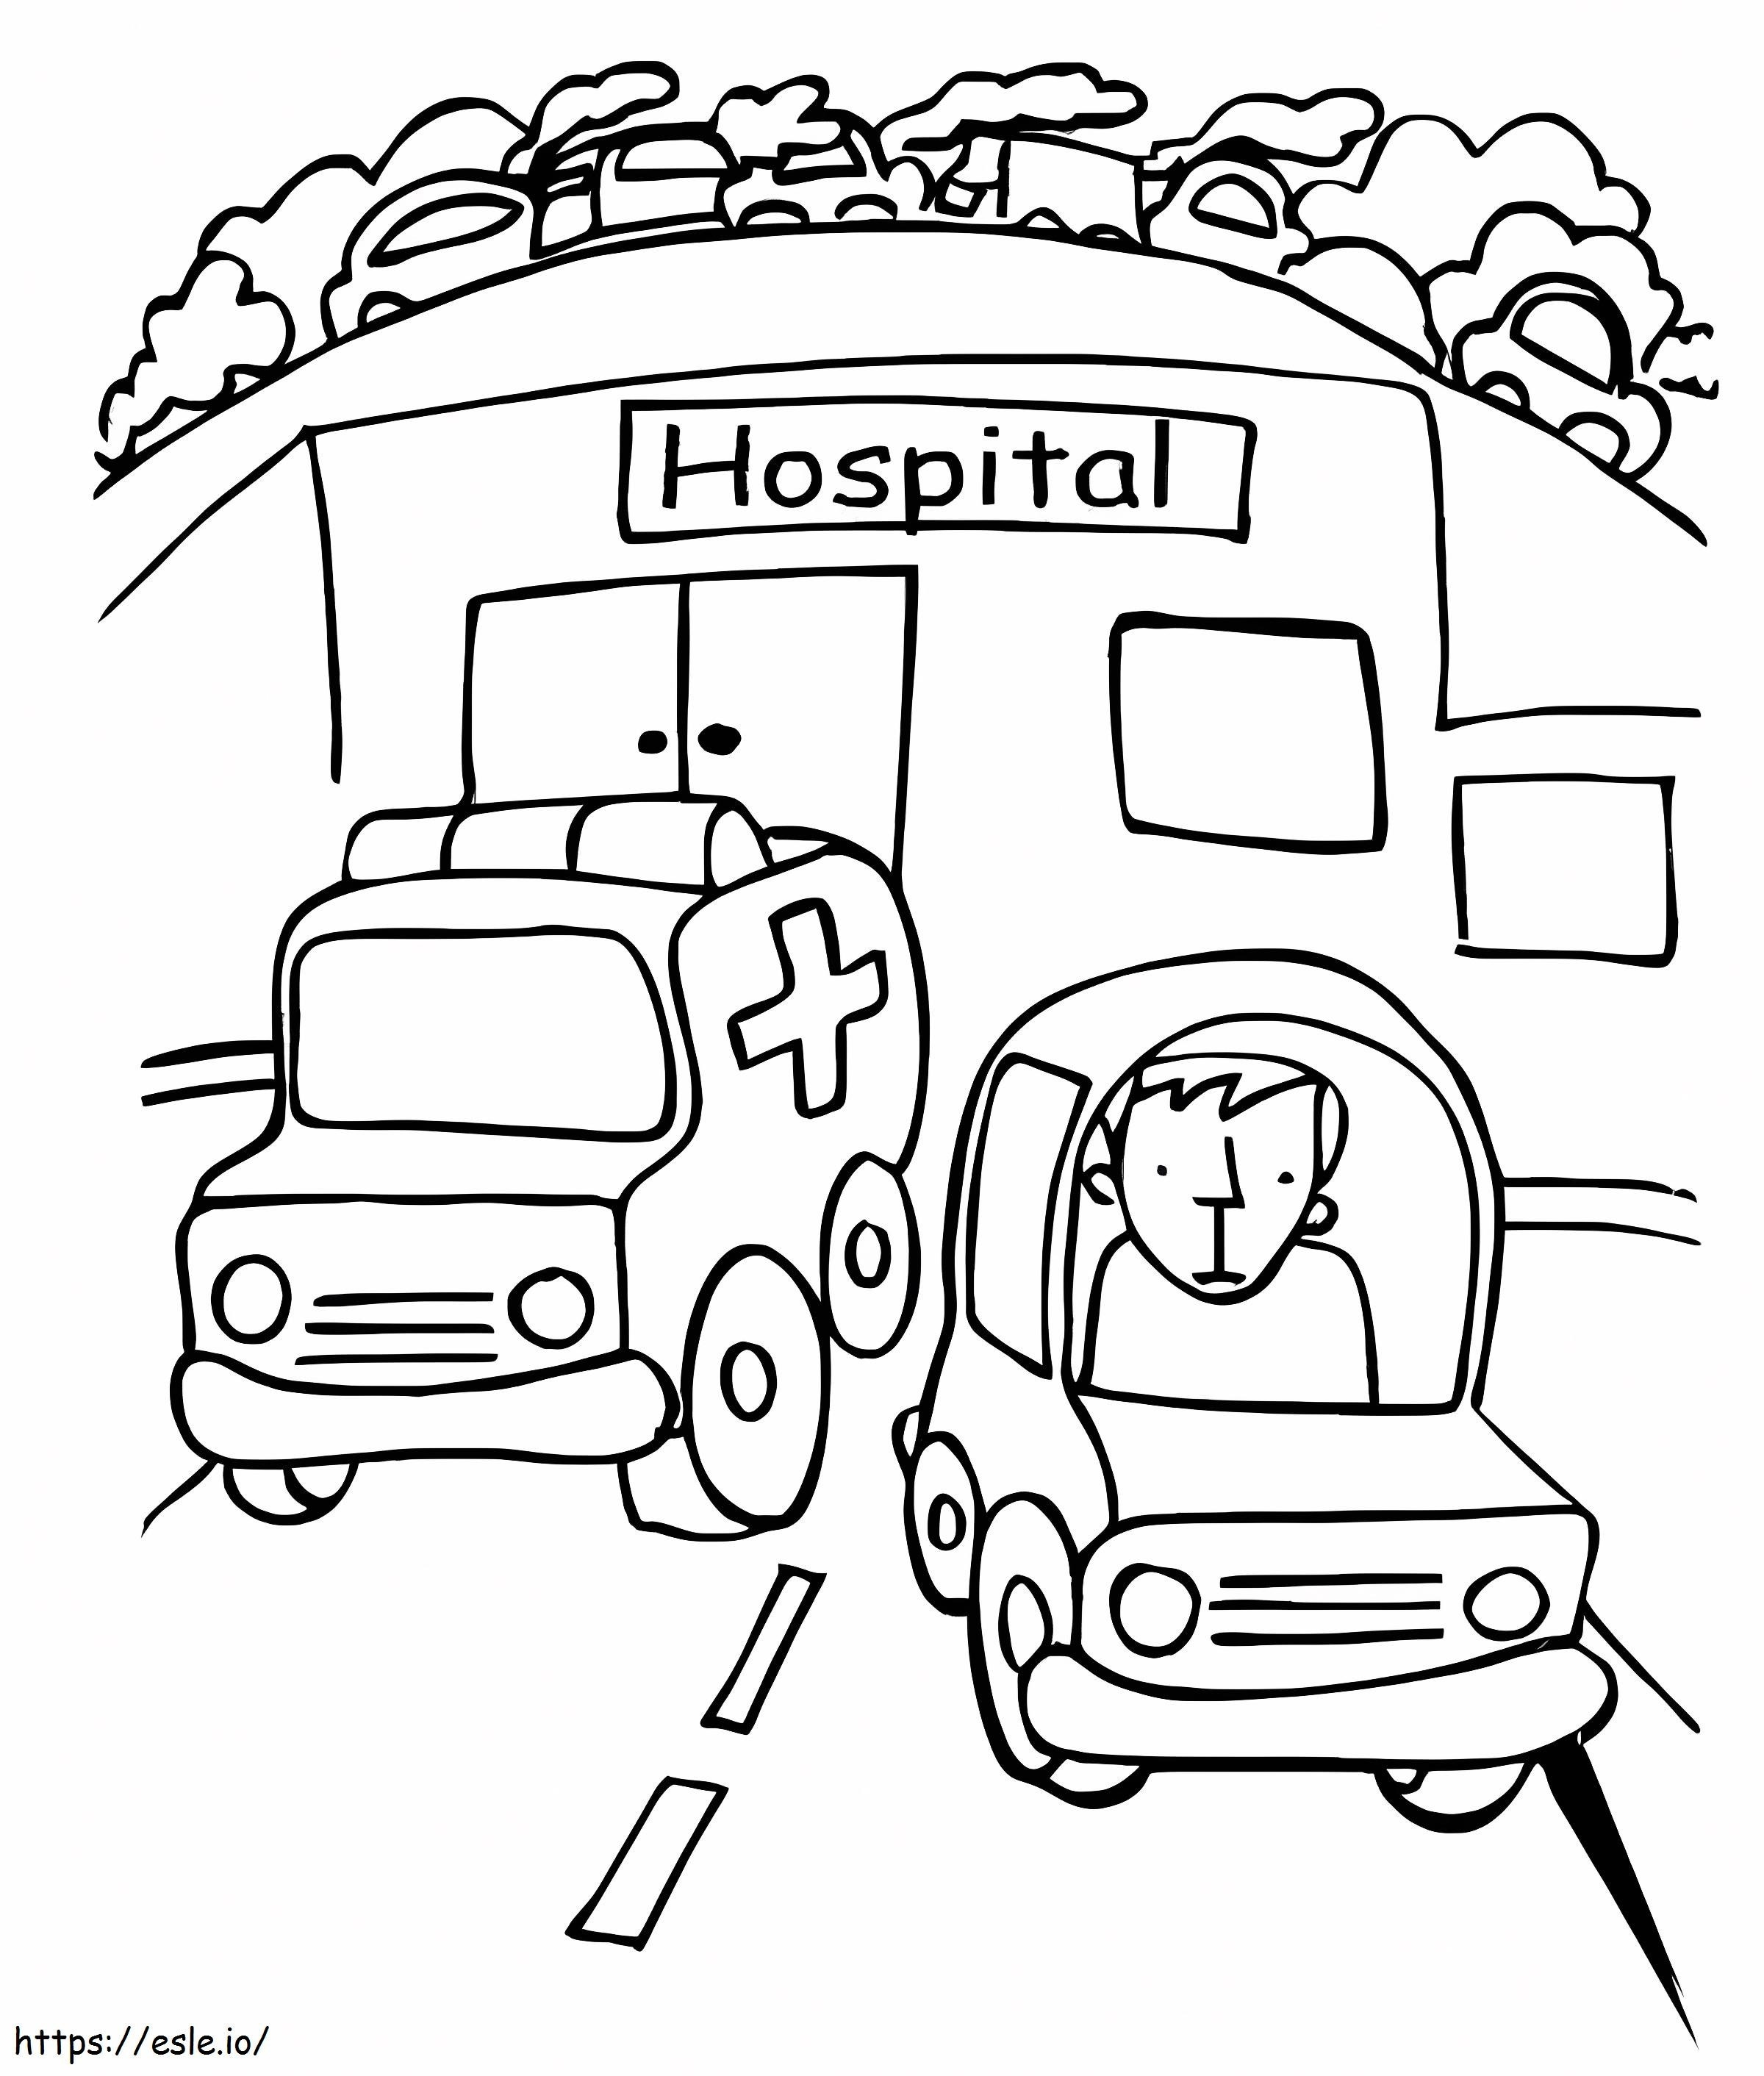 Ambulance And Hospital coloring page